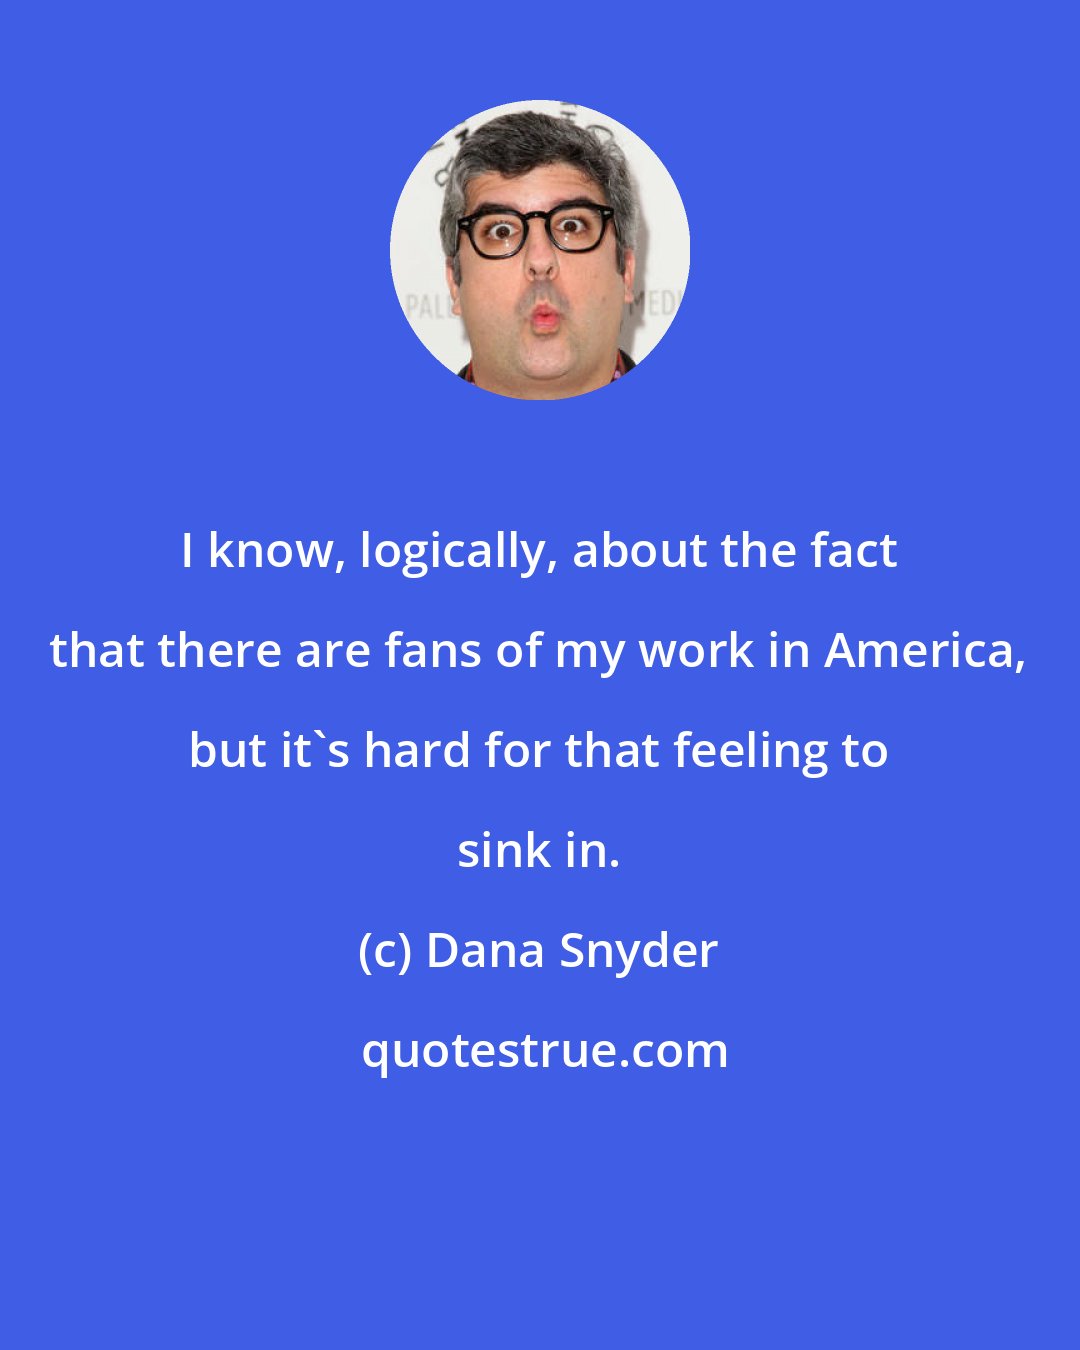 Dana Snyder: I know, logically, about the fact that there are fans of my work in America, but it's hard for that feeling to sink in.